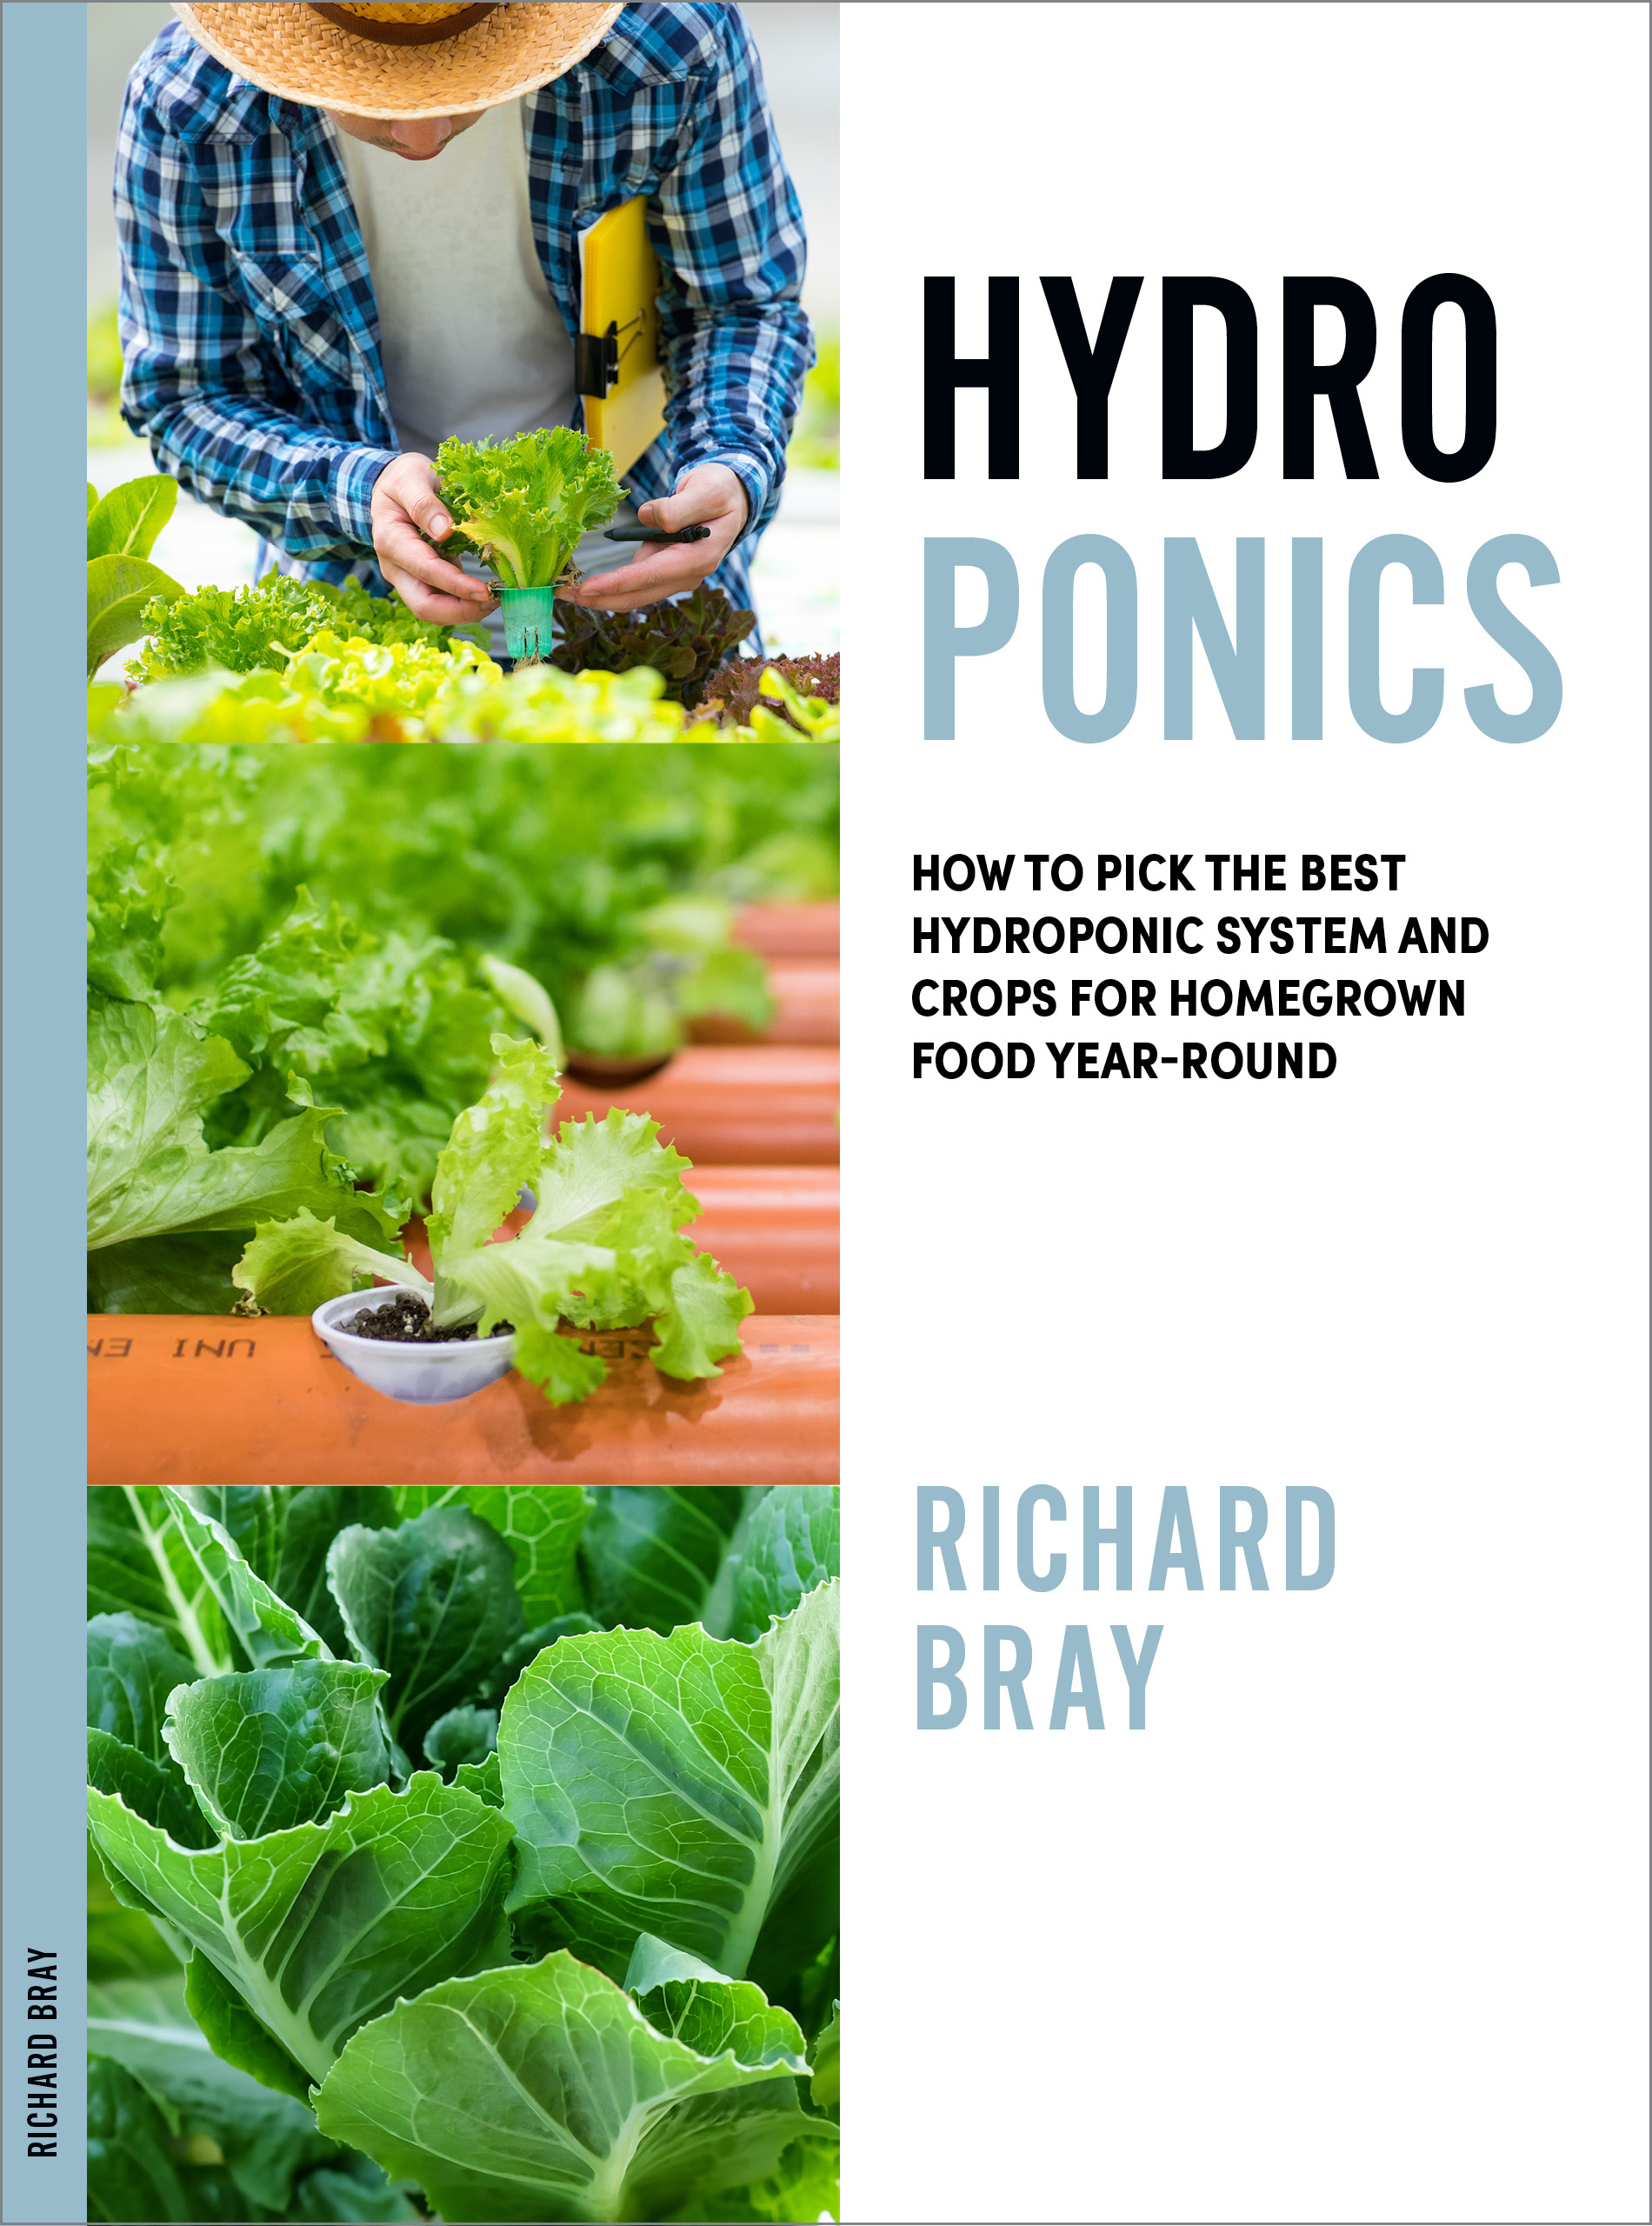 FREE: Hydroponics: How to Pick the Best Hydroponic System and Crops for Homegrown Food Year-Round by Richard Bray